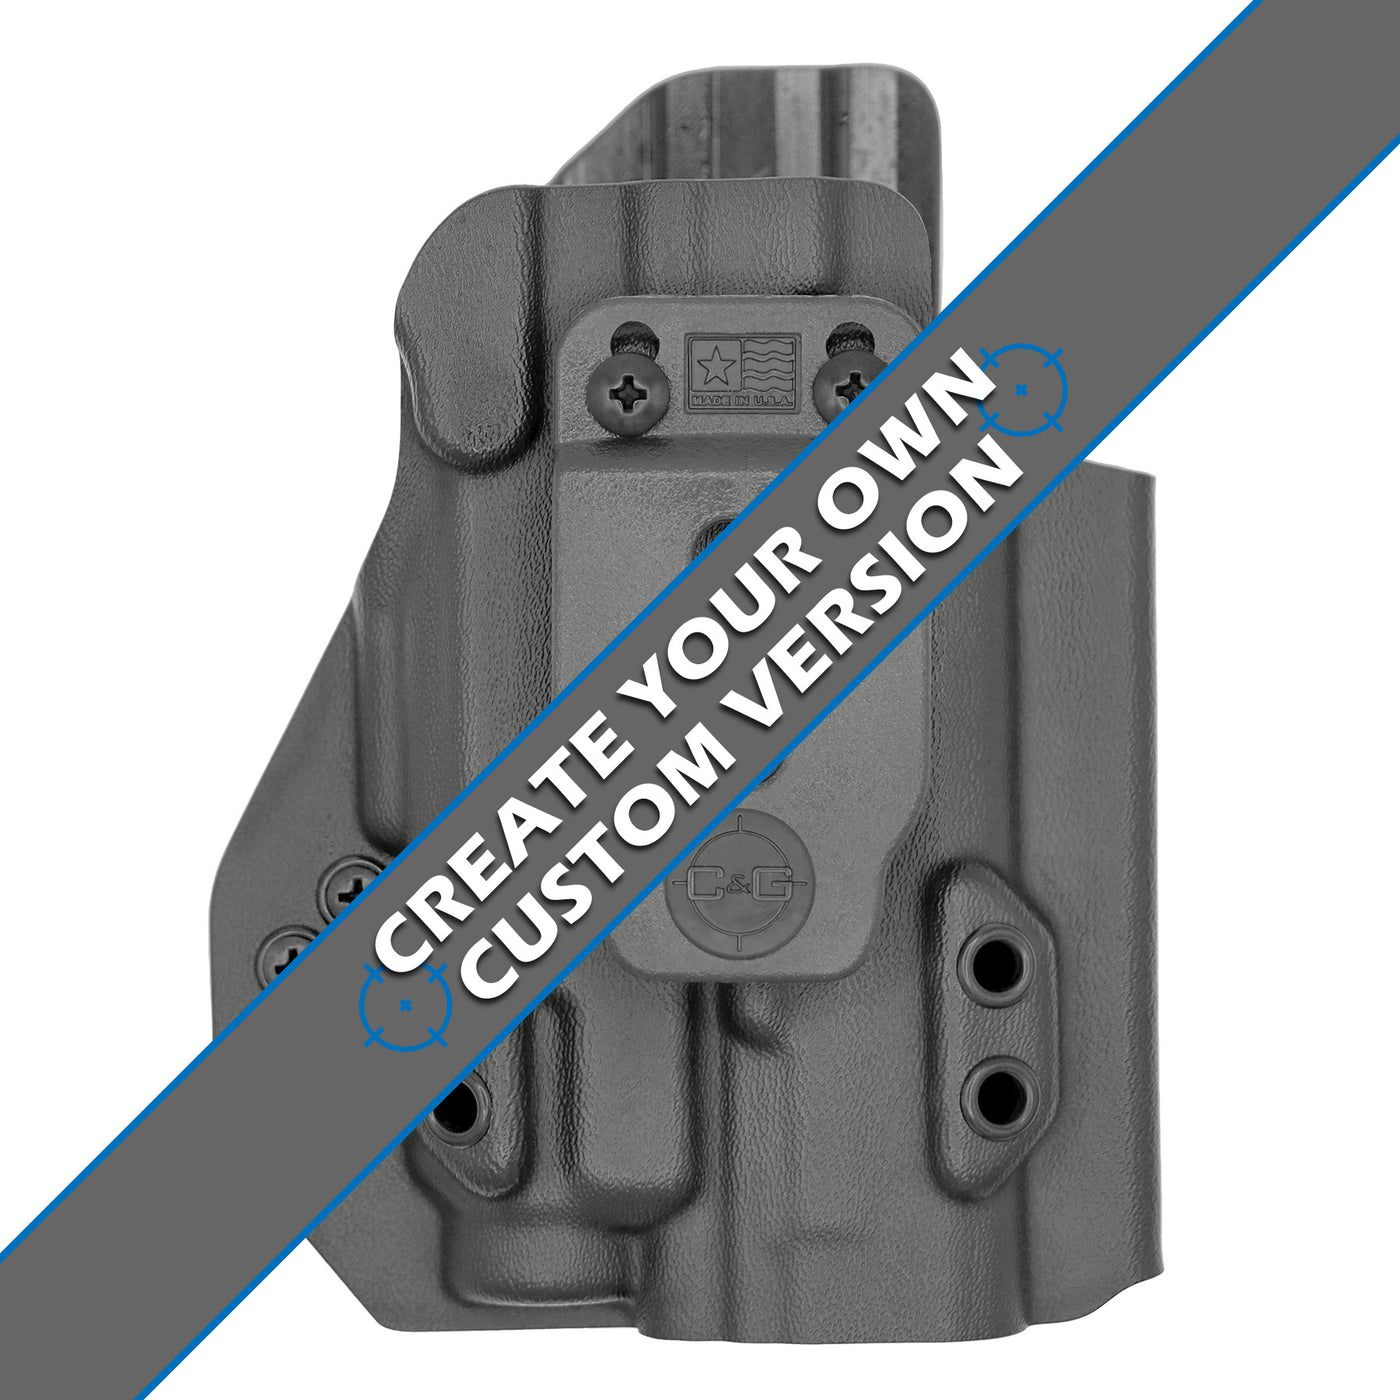 C&G Holsters custom IWB Tactical CZ P07/9 Streamlight tlr7/a